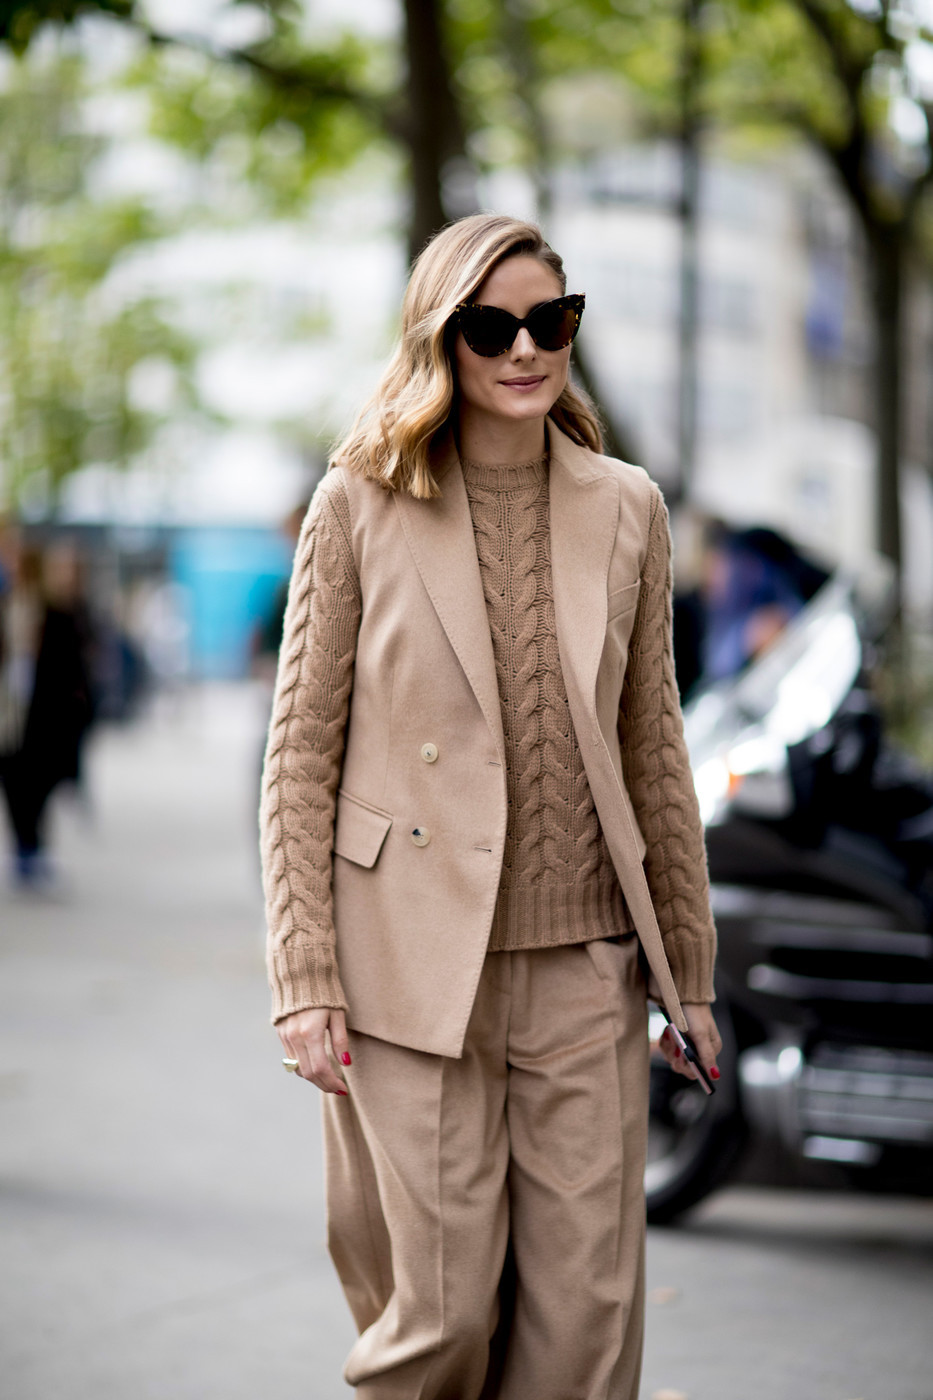 Olivia Palermo in sunglasses by Yeah Sunglasses!